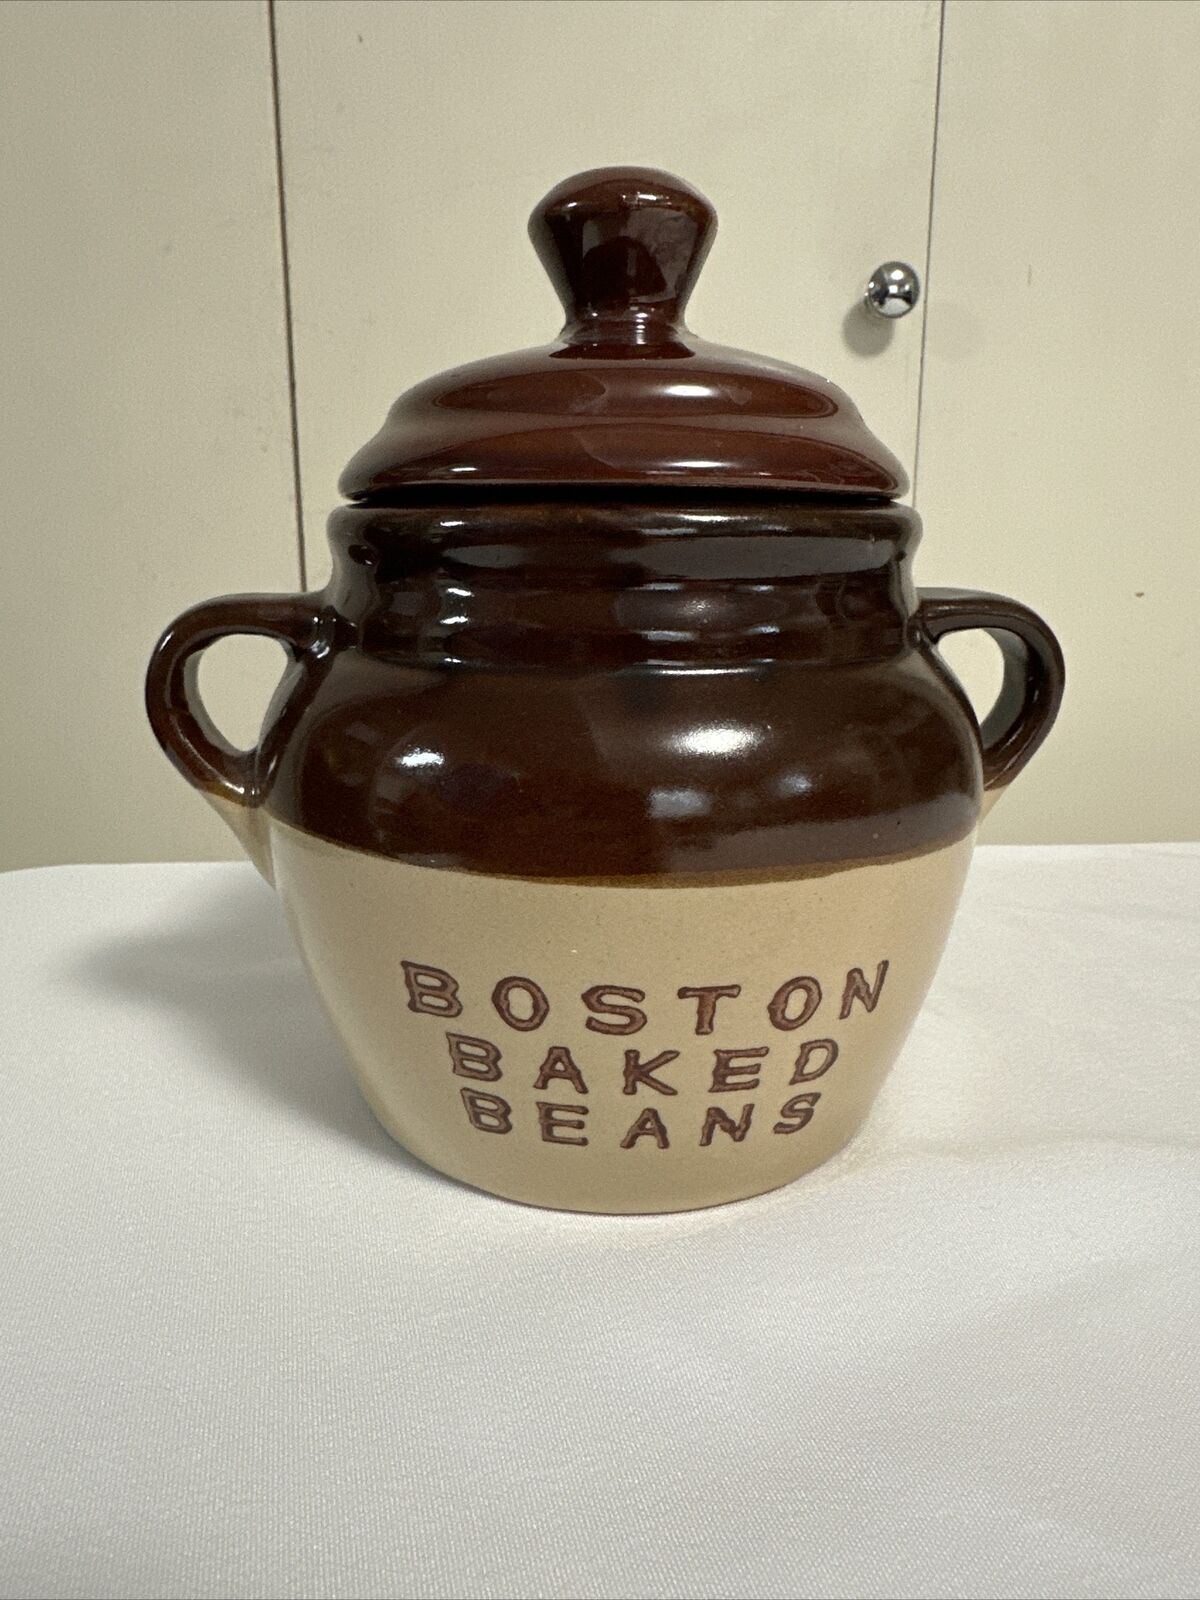 Vtg Boston Baked Beans Bean Pot By Monmouth Pottery - LID HAS BEEN GLUED - READ